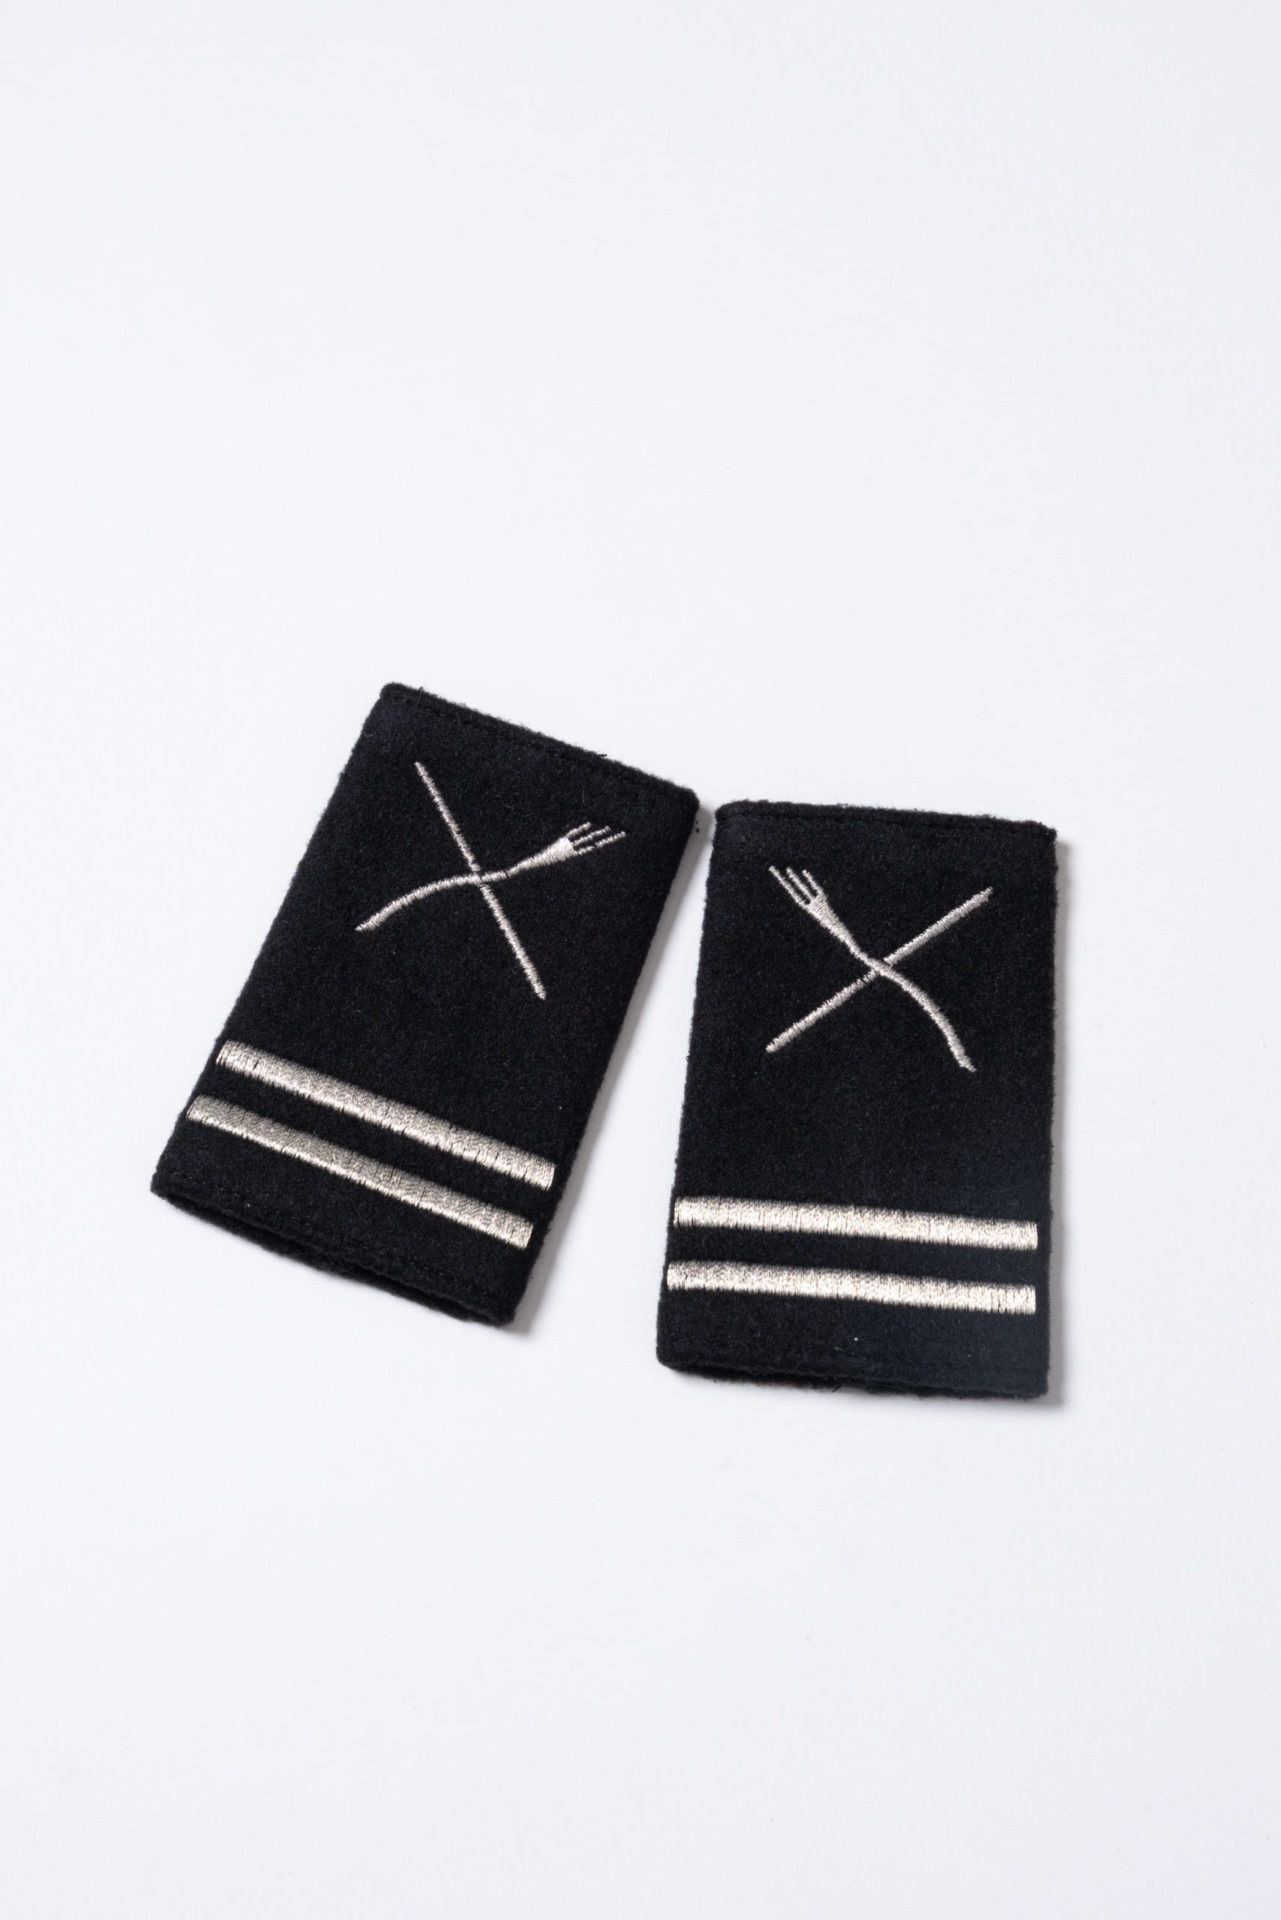 Silver second chef epaulettes